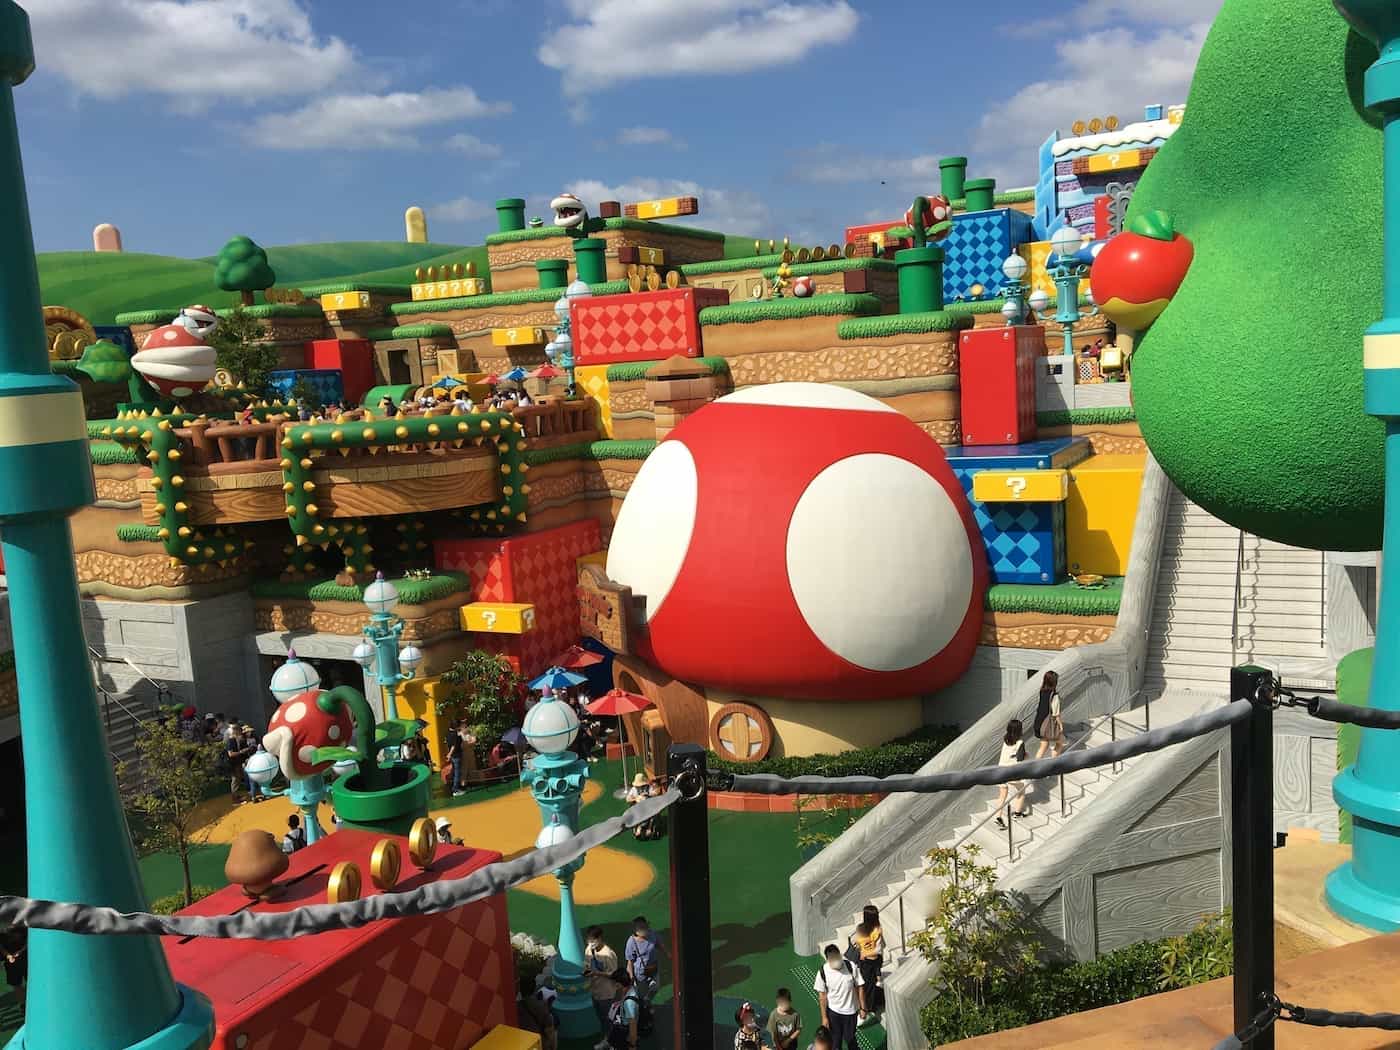 View from the top level overlooking Super Nintendo World, highlighting various attractions.